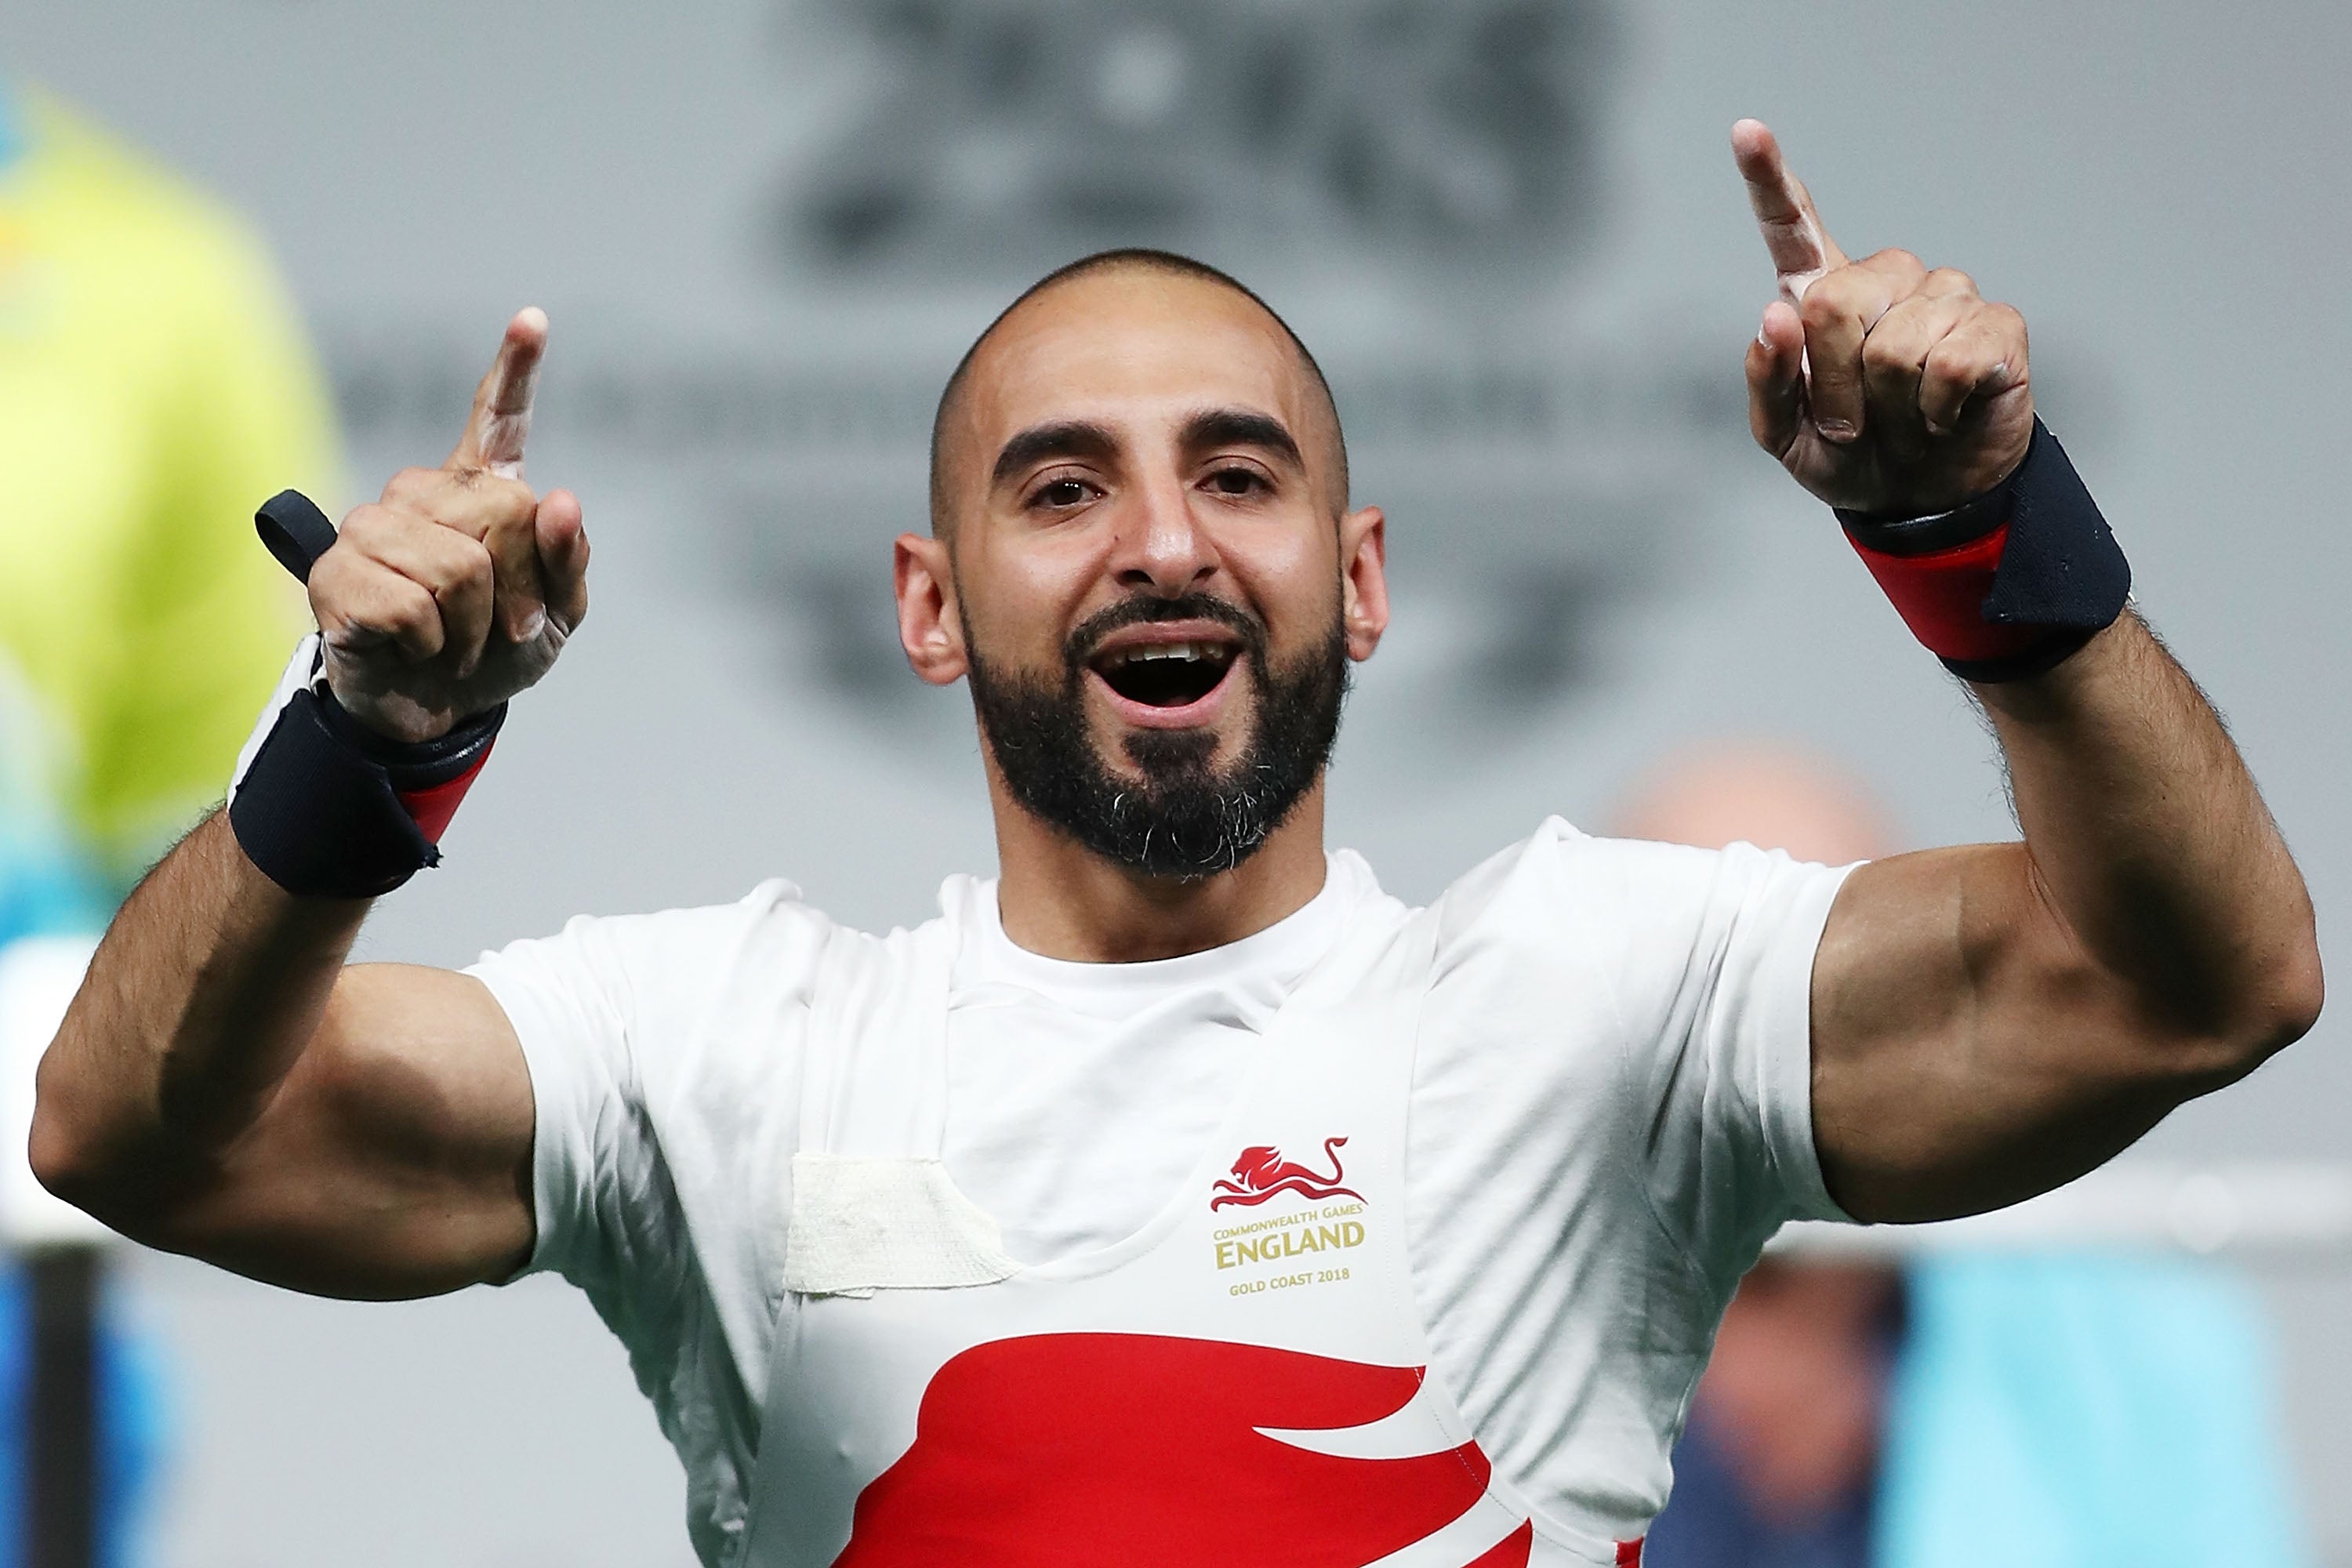 Ali Jawad of England celebrates a lift in the Men’s Lightweight Final at the Gold Coast 2018 Commonwealth Games